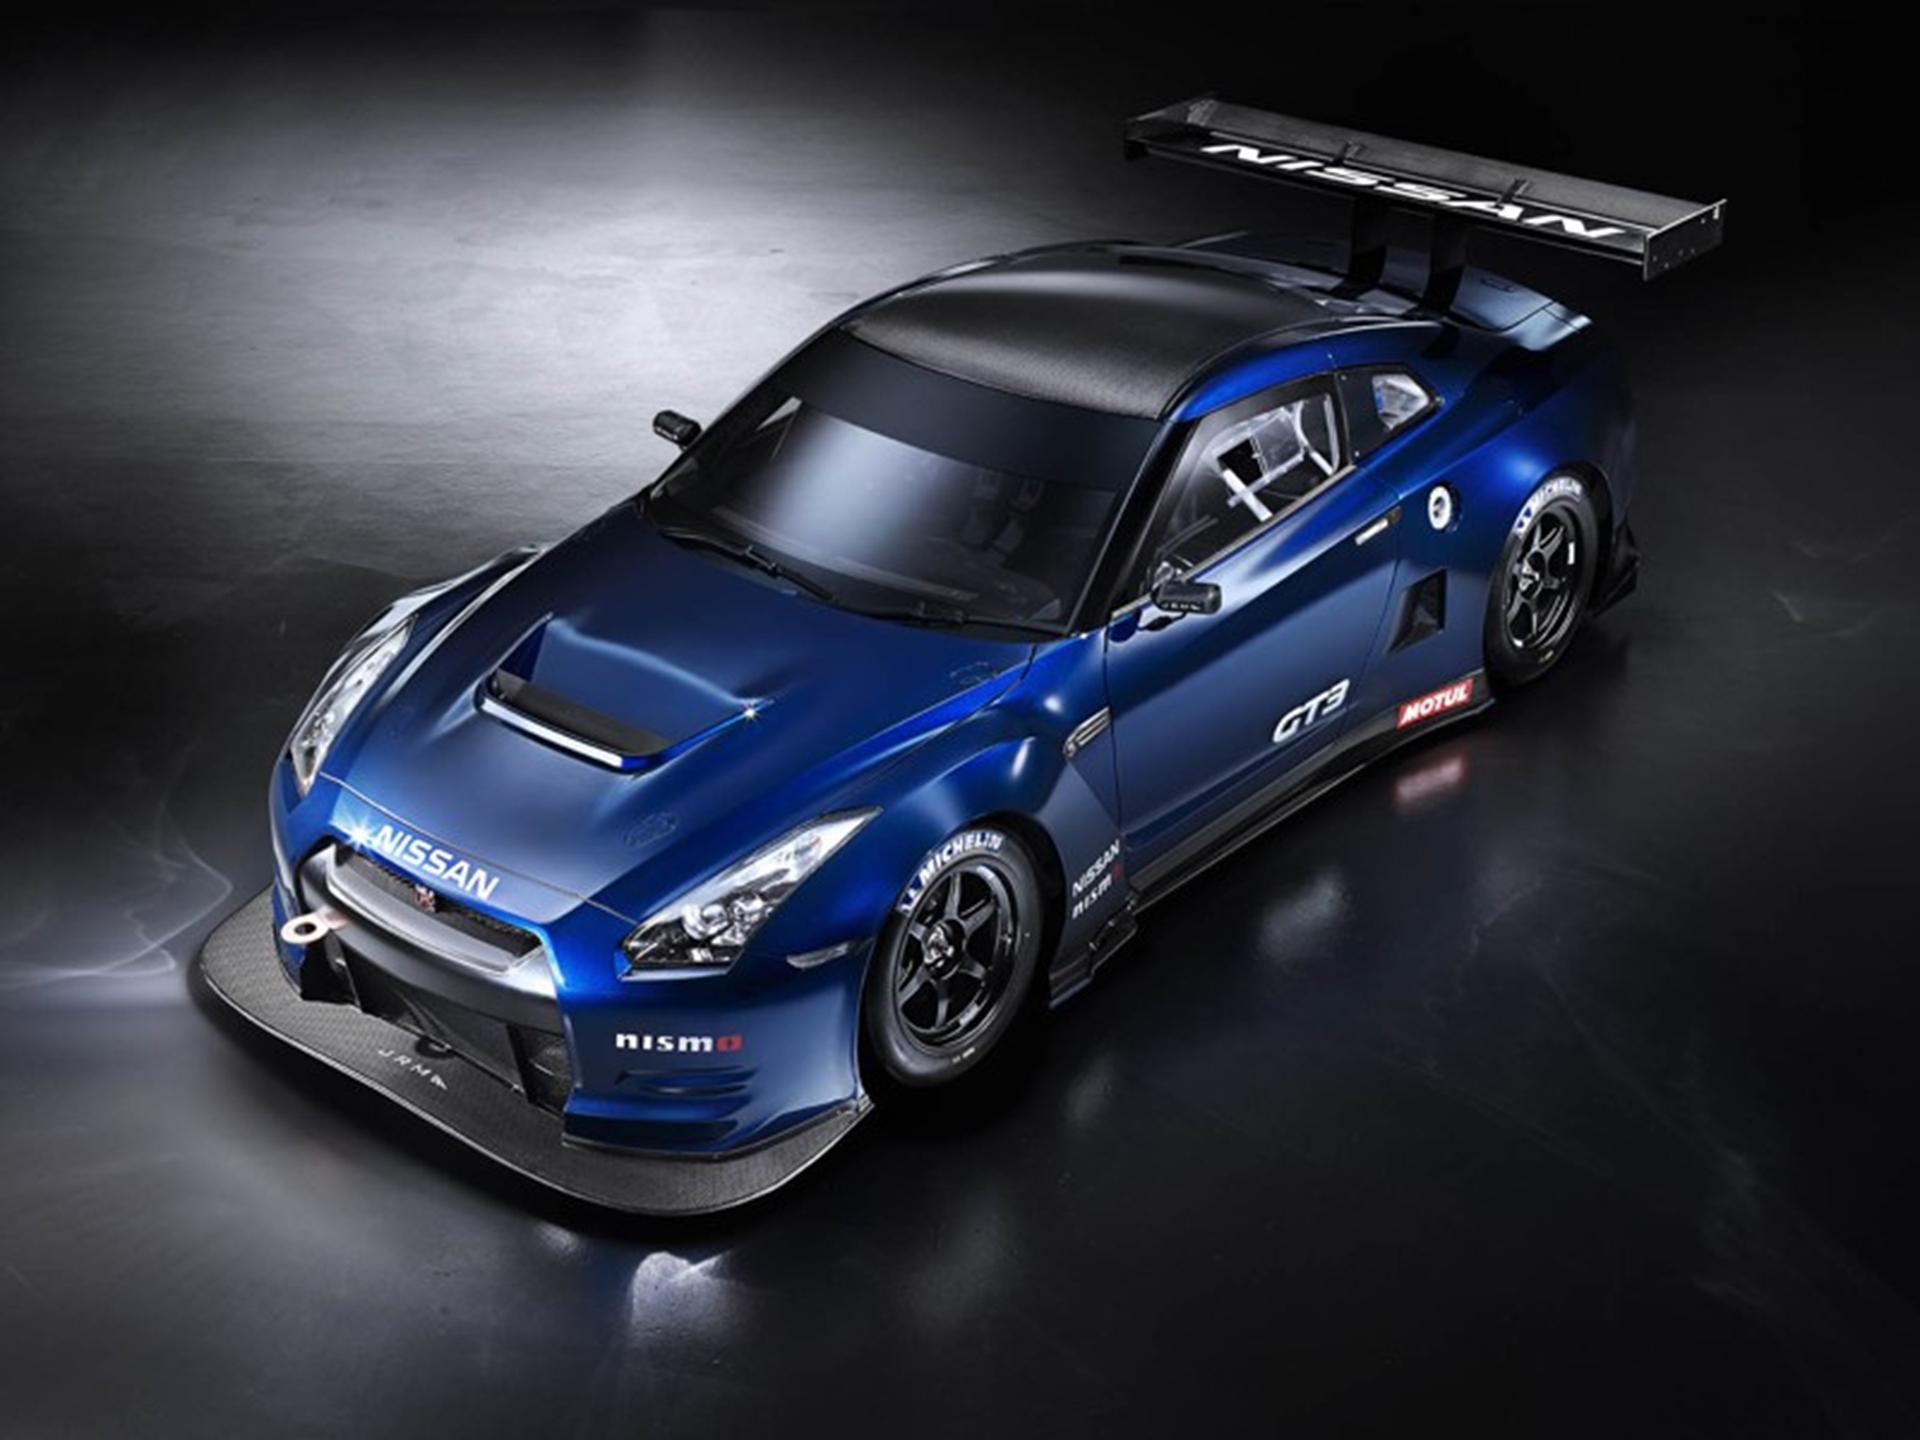 NISMO and JR Motorsports Release the Nissan GT-R